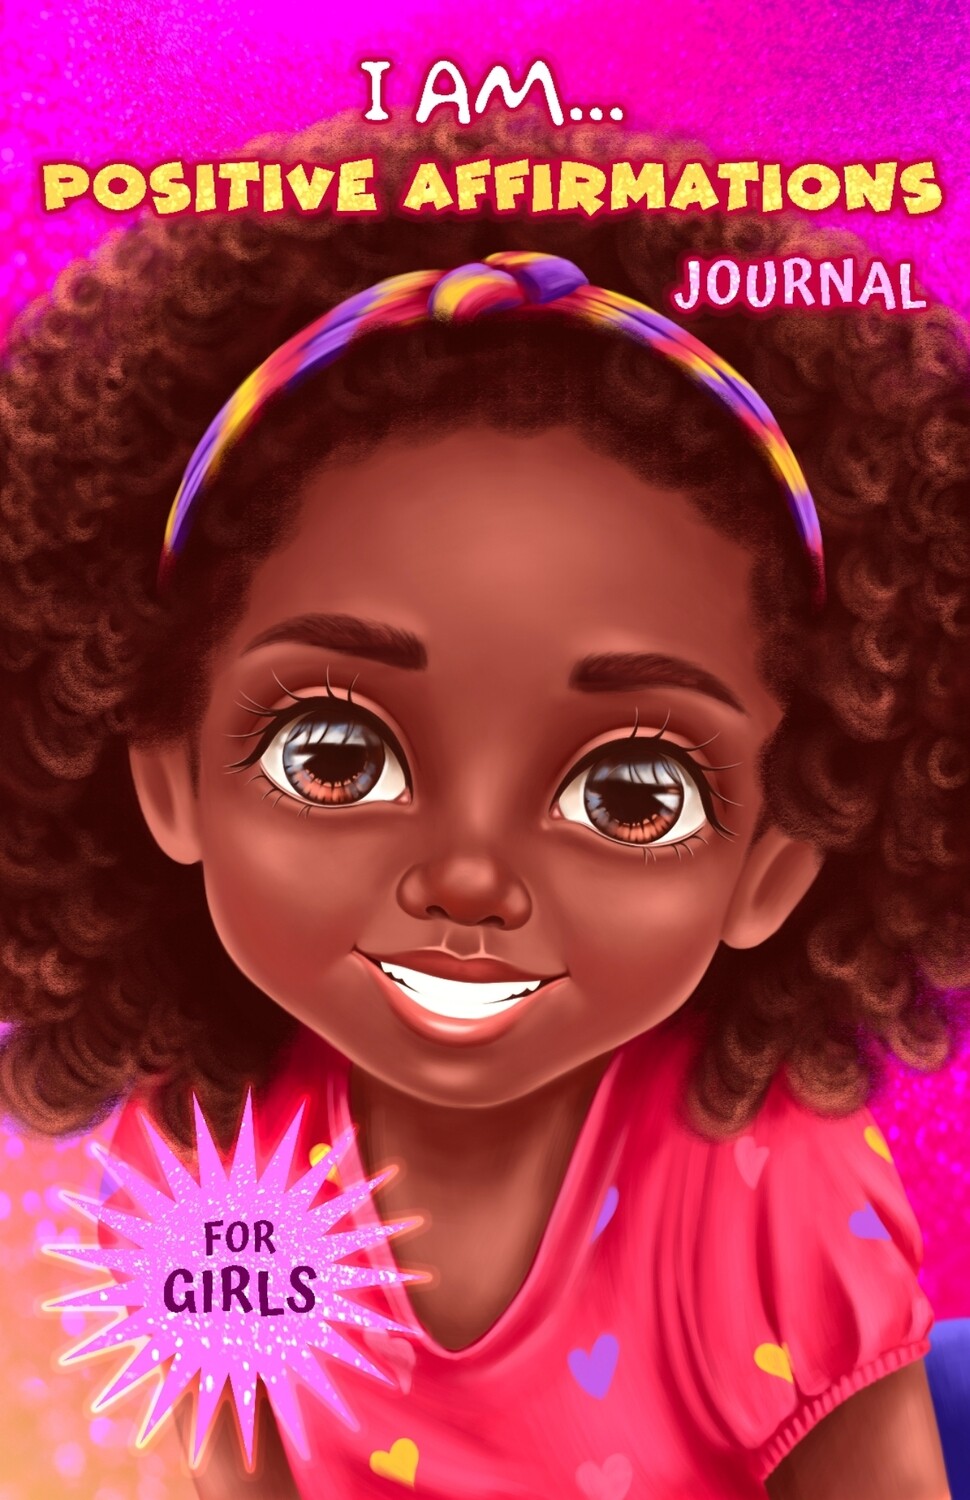 I Am... Positive Affirmations Journal For Girls: A Journal to Help Girls Build Positive Attitude, Confidence and Mindfulness ISBN 978-1838186746 By Habi Akinteye 